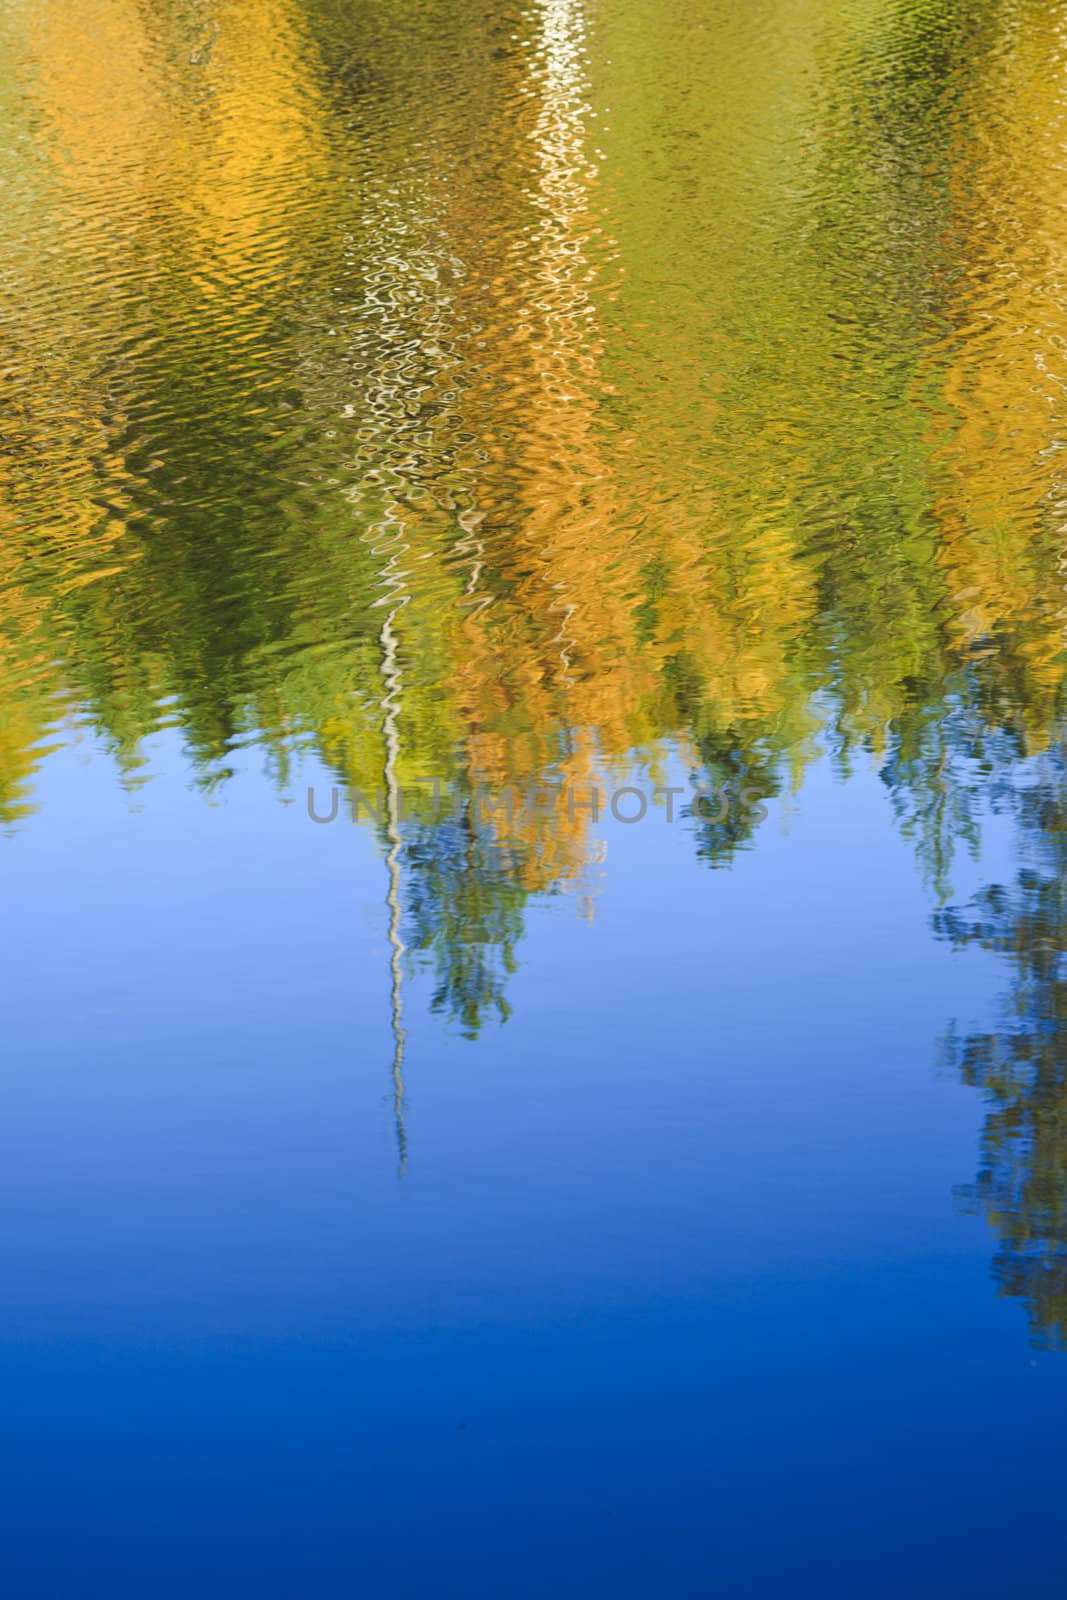 Fall colored forest reflections on the blue water